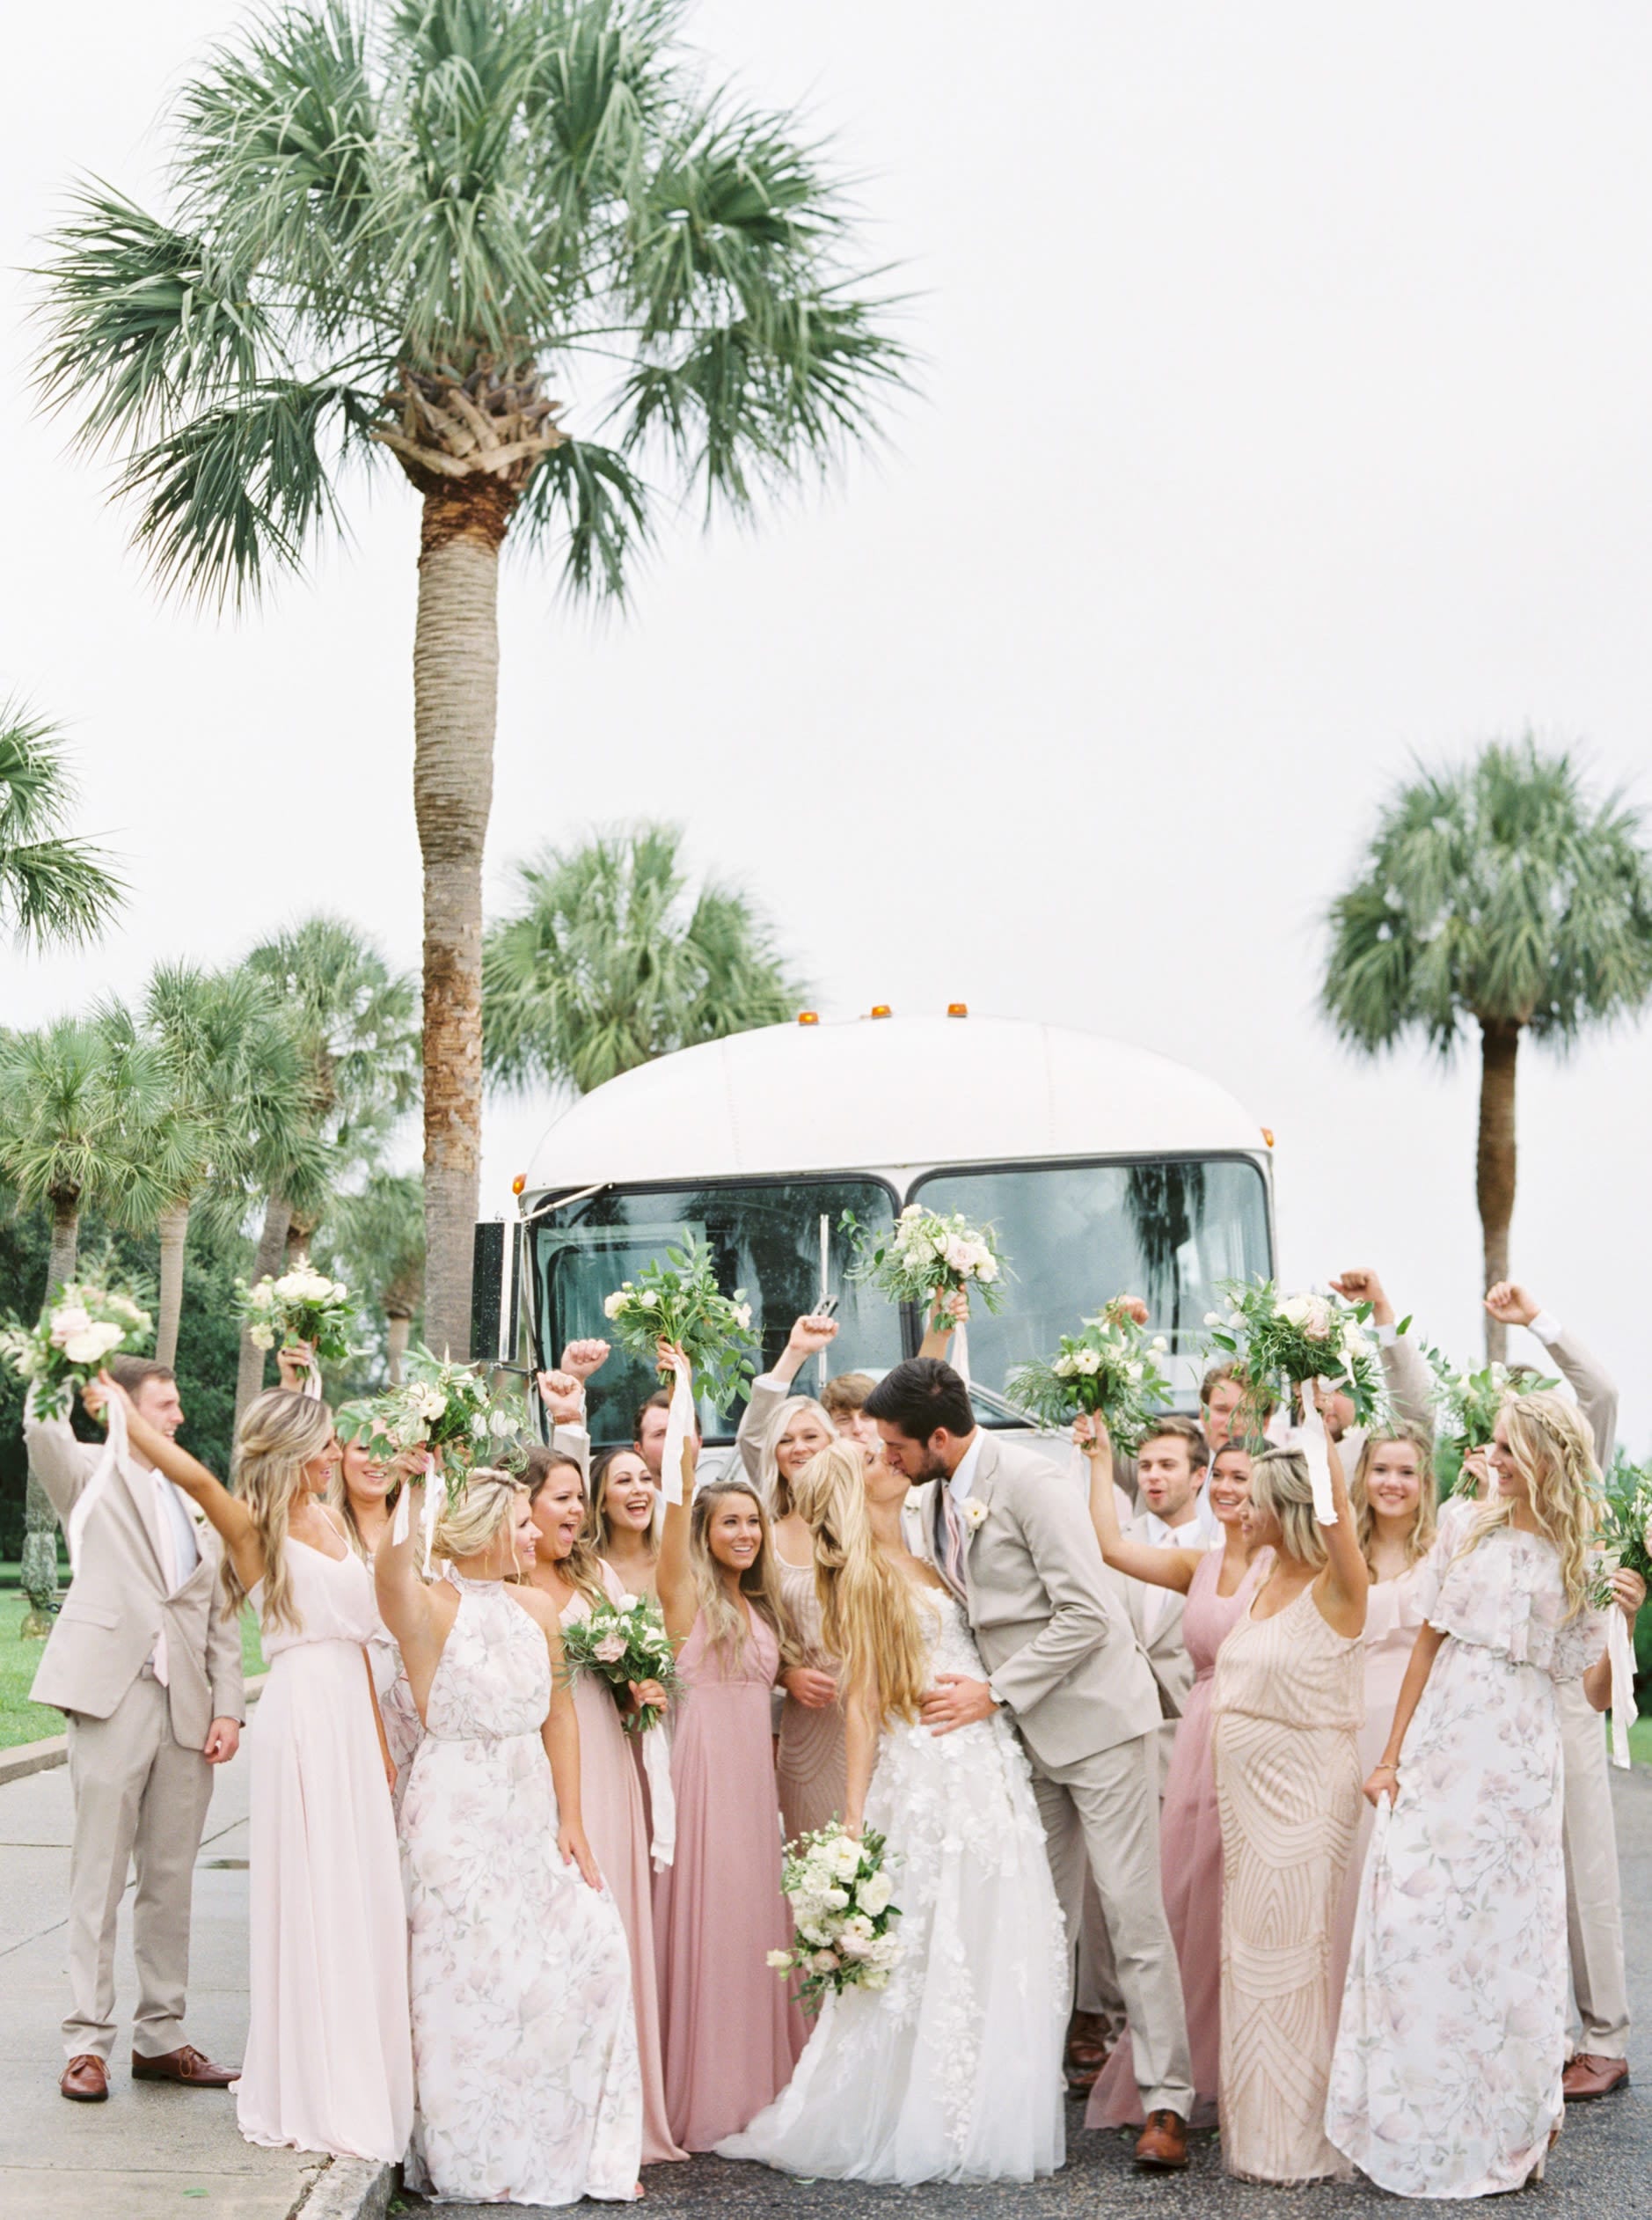 Bridal party standing in front of a vintage pink bus on their way to a luxury charleston destination wedding.